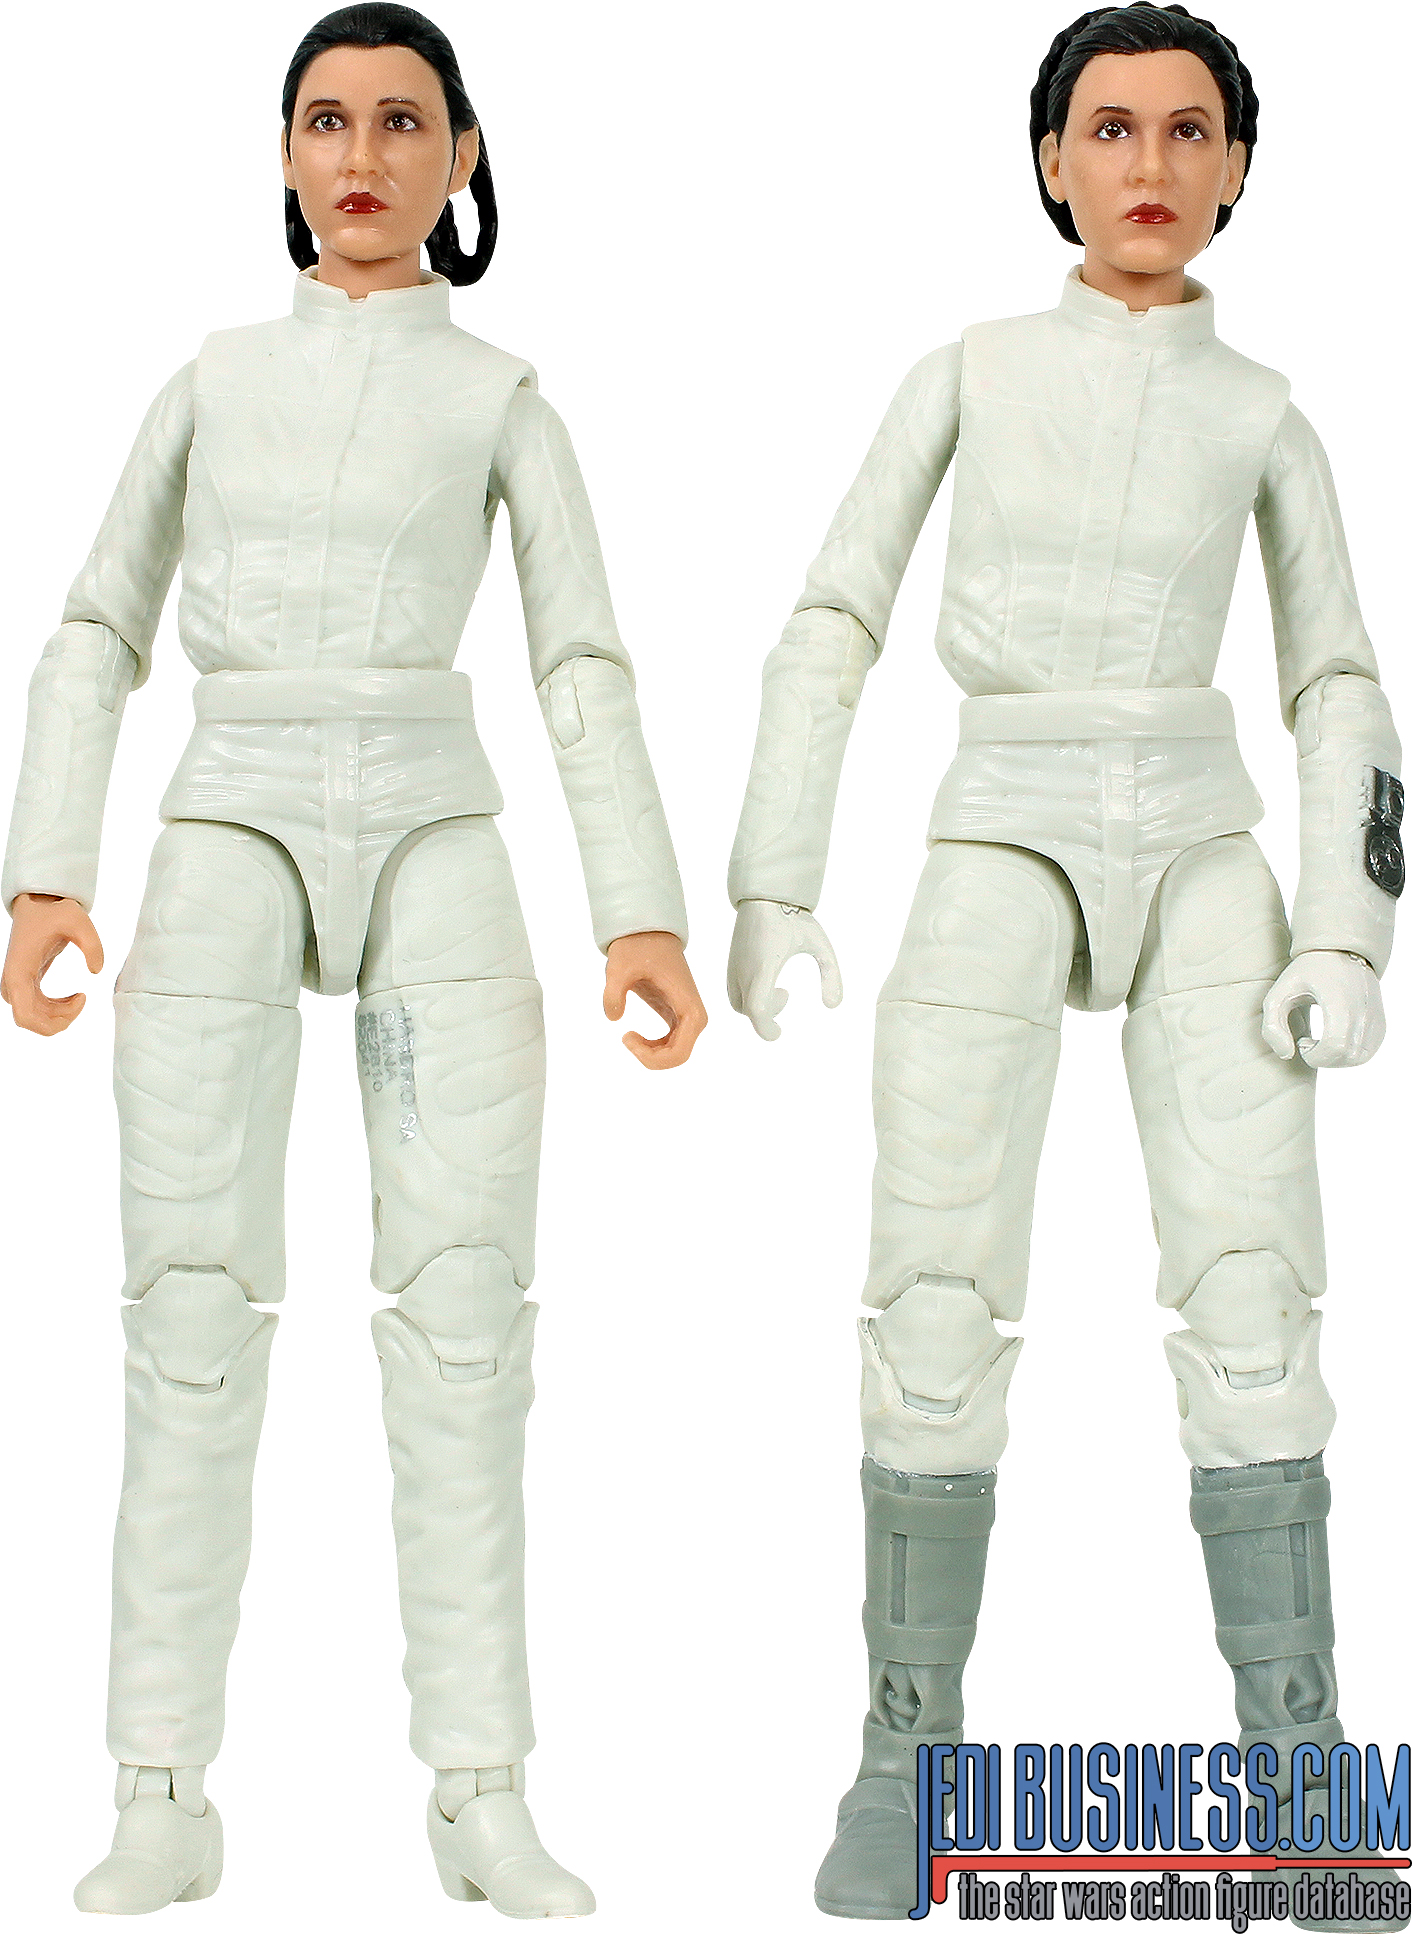 Han Solo 2-Pack With Princess Leia